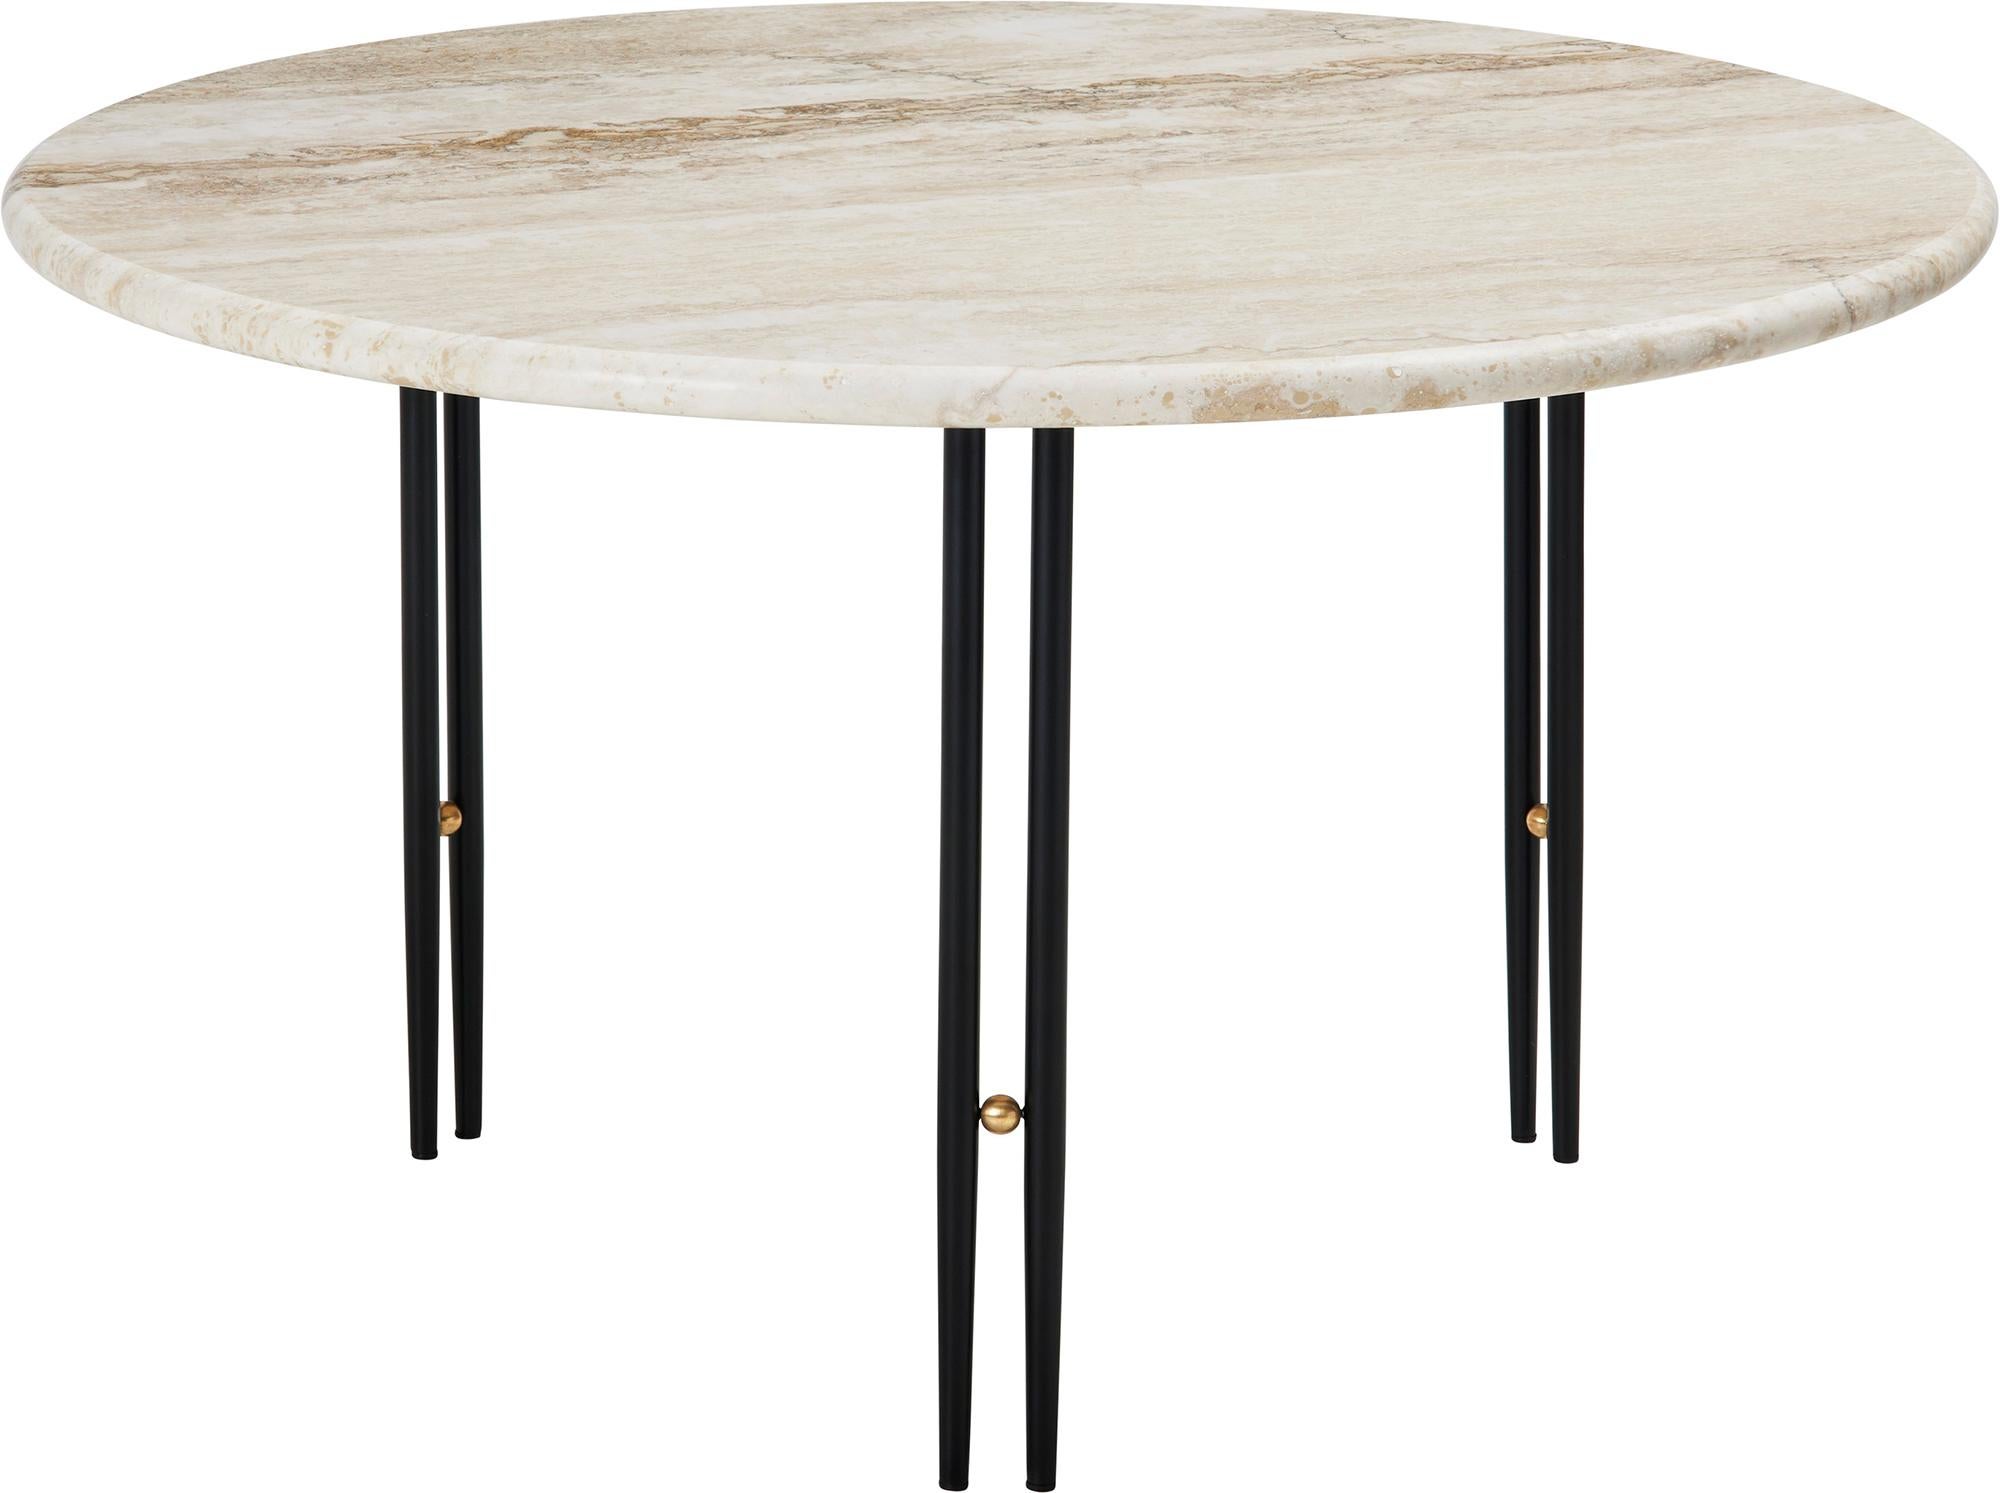 Large ‘IOI’ Travertine Coffee Table by GamFratesi for GUBI For Sale 6